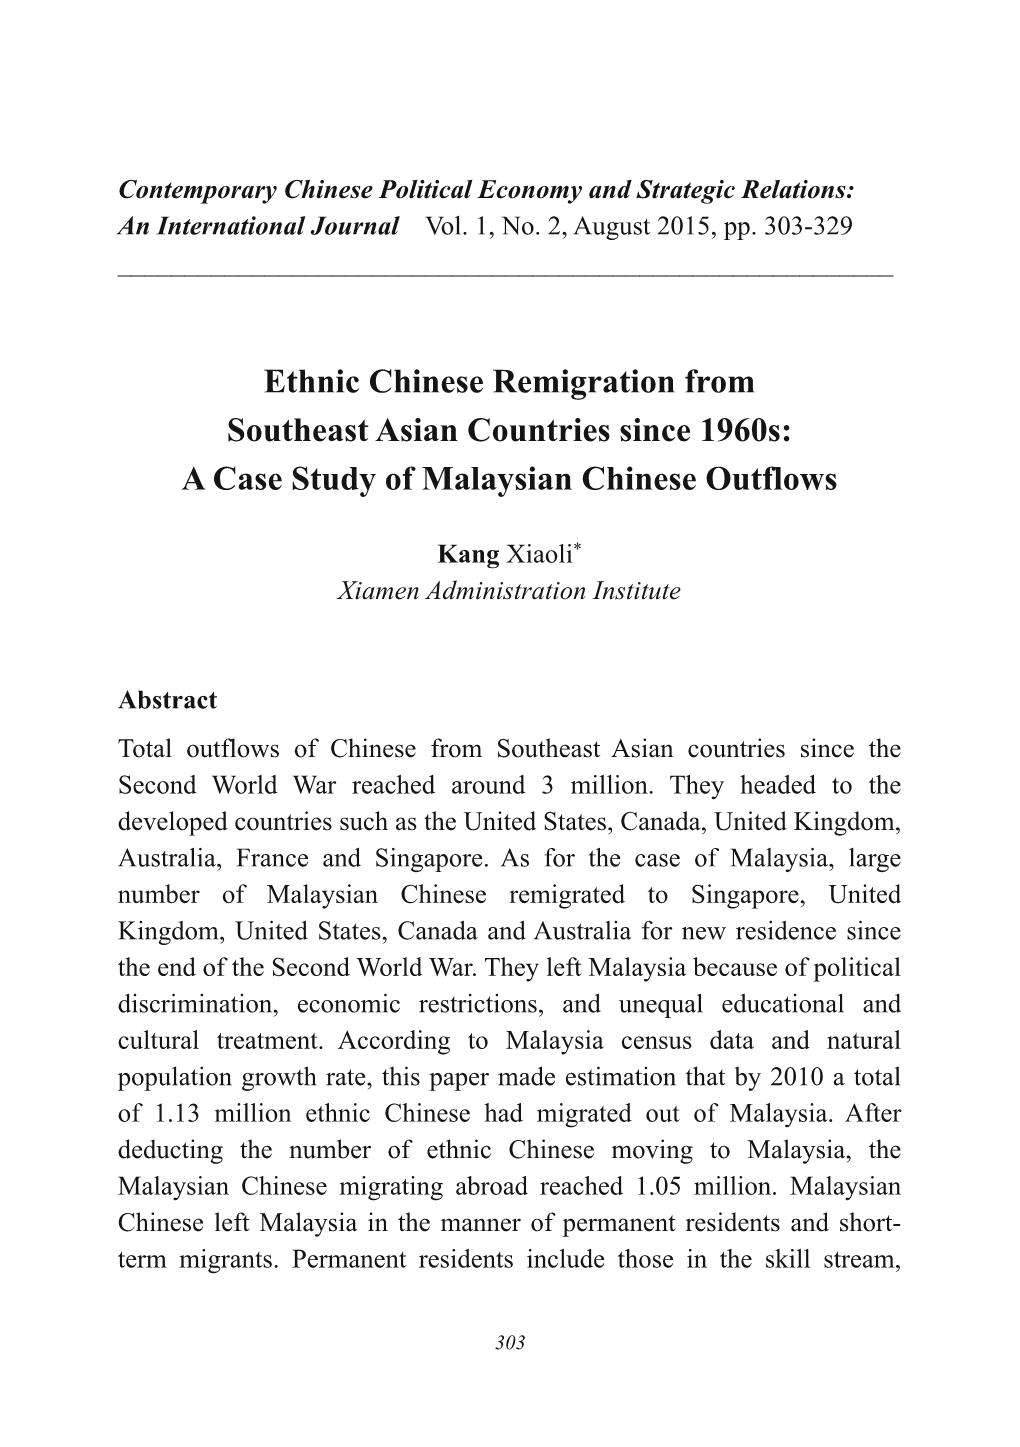 Ethnic Chinese Remigration from Southeast Asian Countries Since 1960S: a Case Study of Malaysian Chinese Outflows